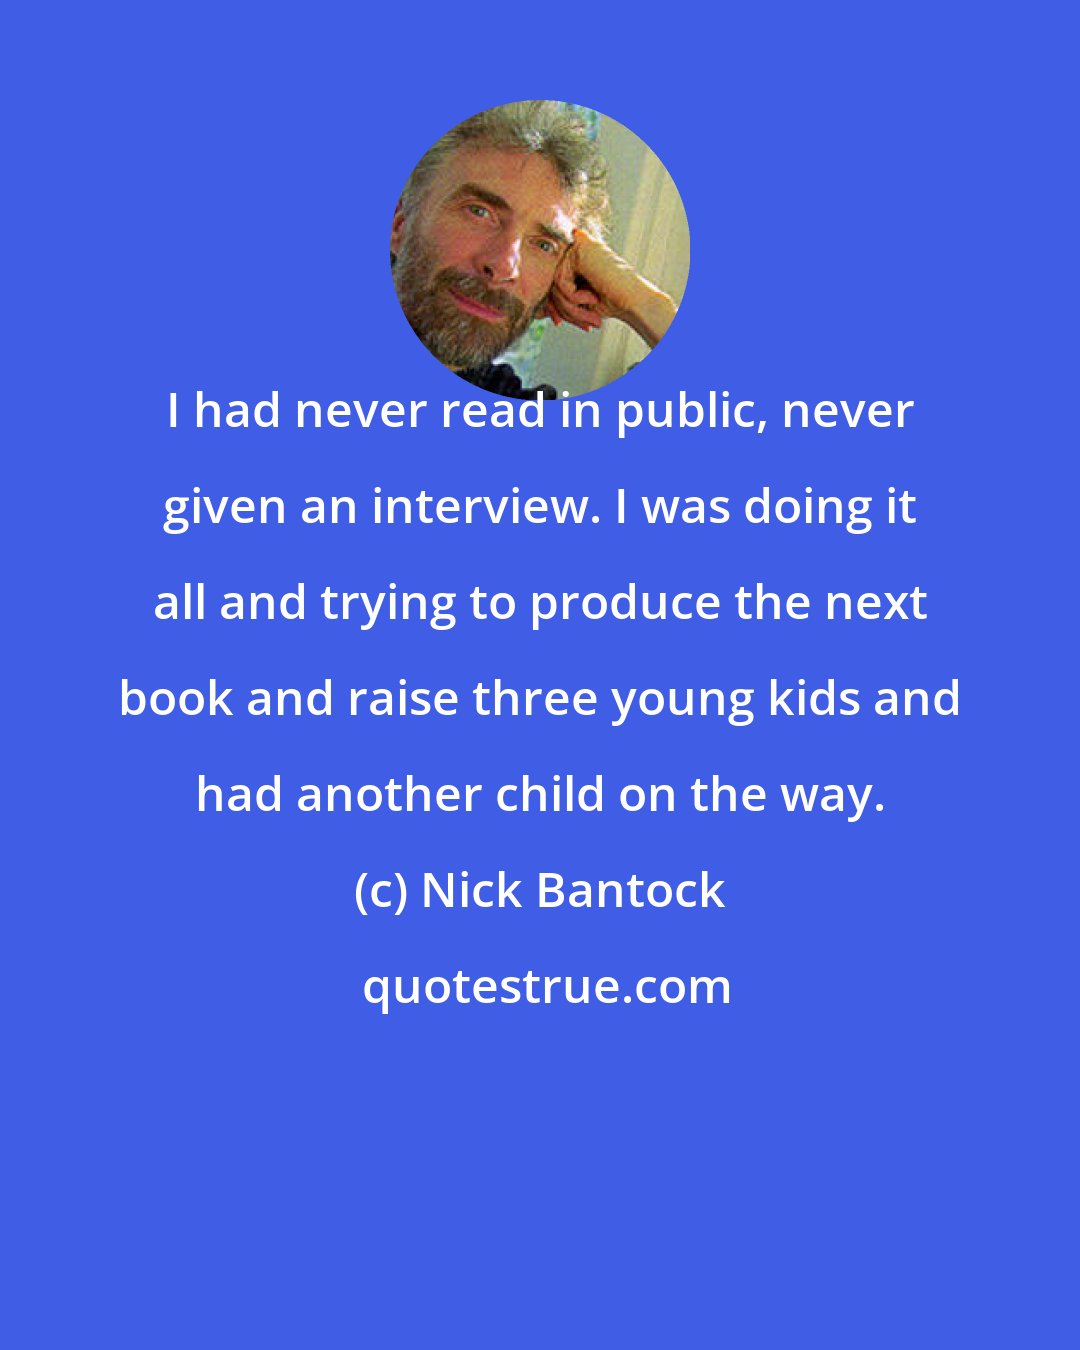 Nick Bantock: I had never read in public, never given an interview. I was doing it all and trying to produce the next book and raise three young kids and had another child on the way.